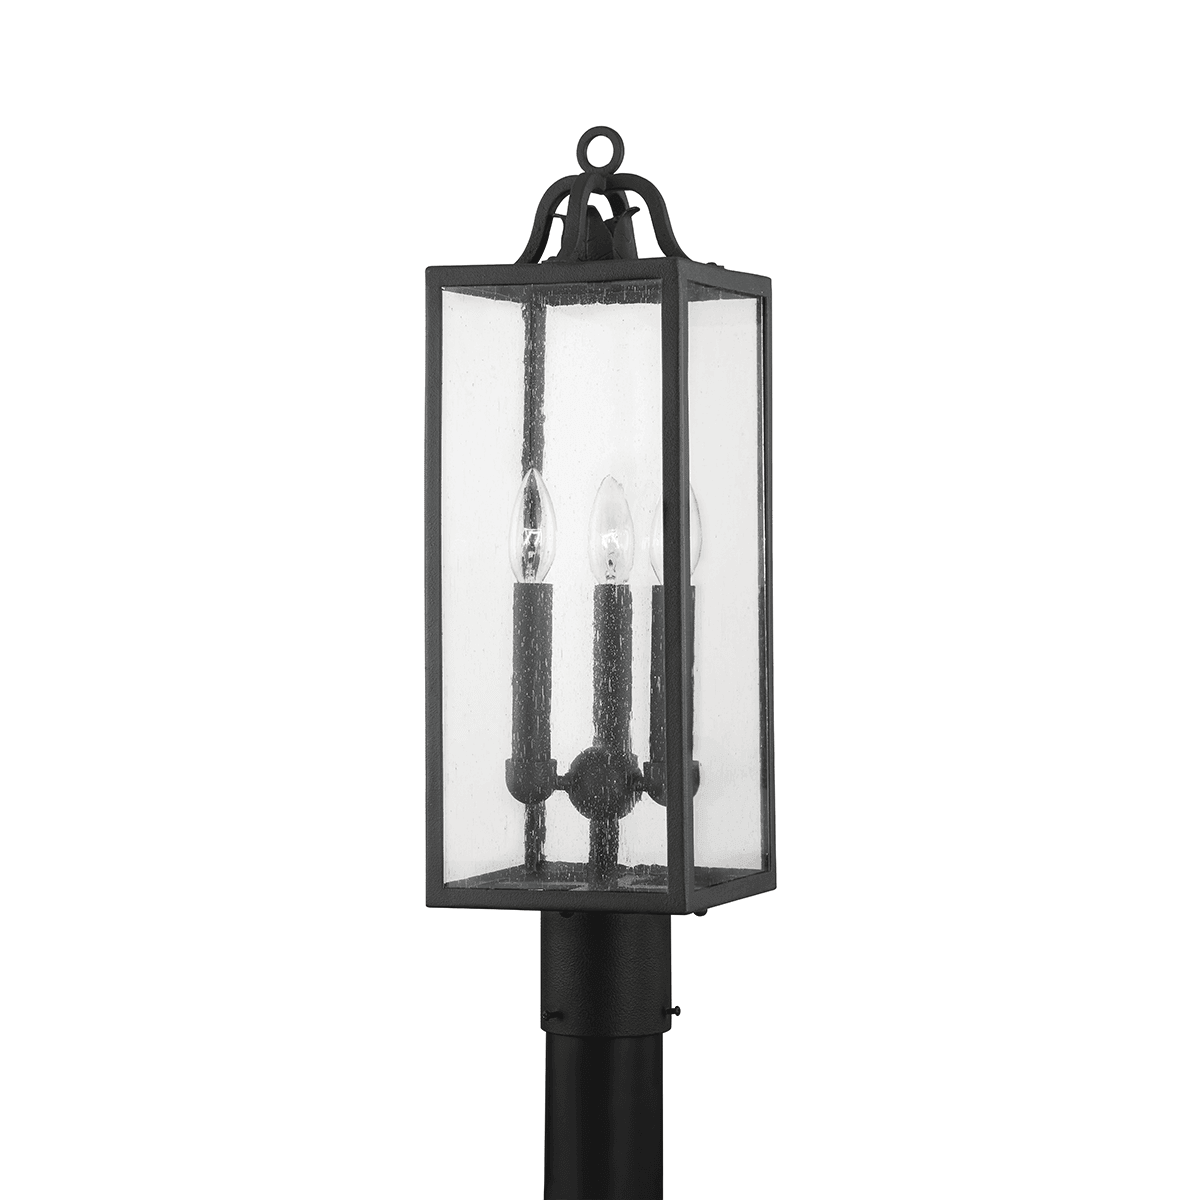 Troy Lighting - Caiden Exterior Post Mount - P2067-FOR | Montreal Lighting & Hardware